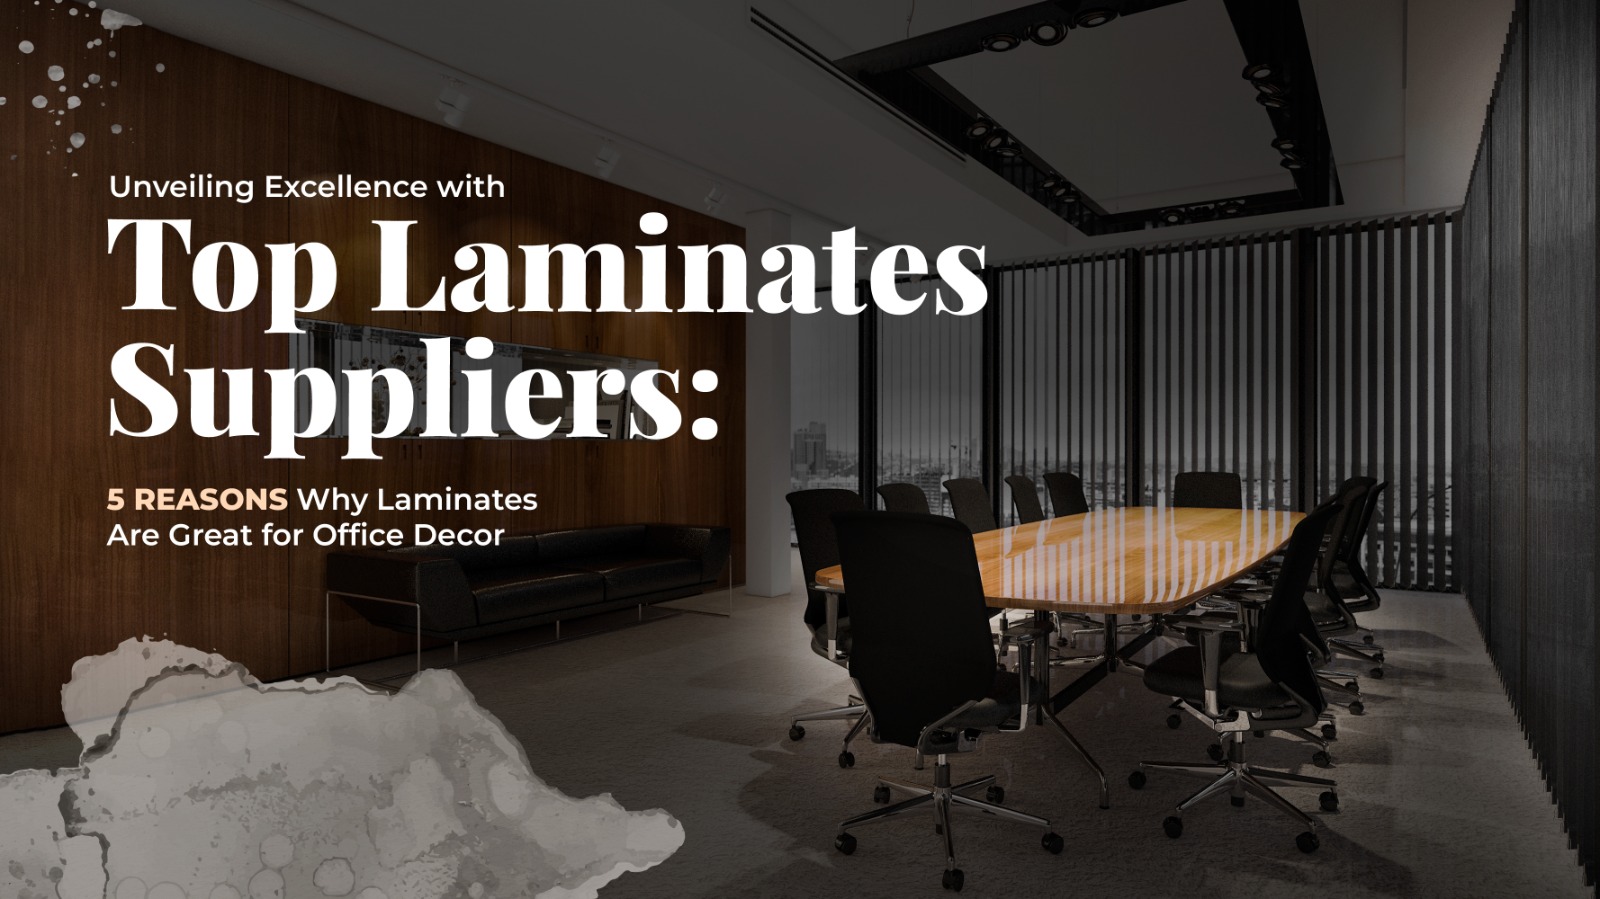 Unveiling Excellence with Top Laminates Suppliers: 5 Reasons Why Laminates Are Great for Office Decor